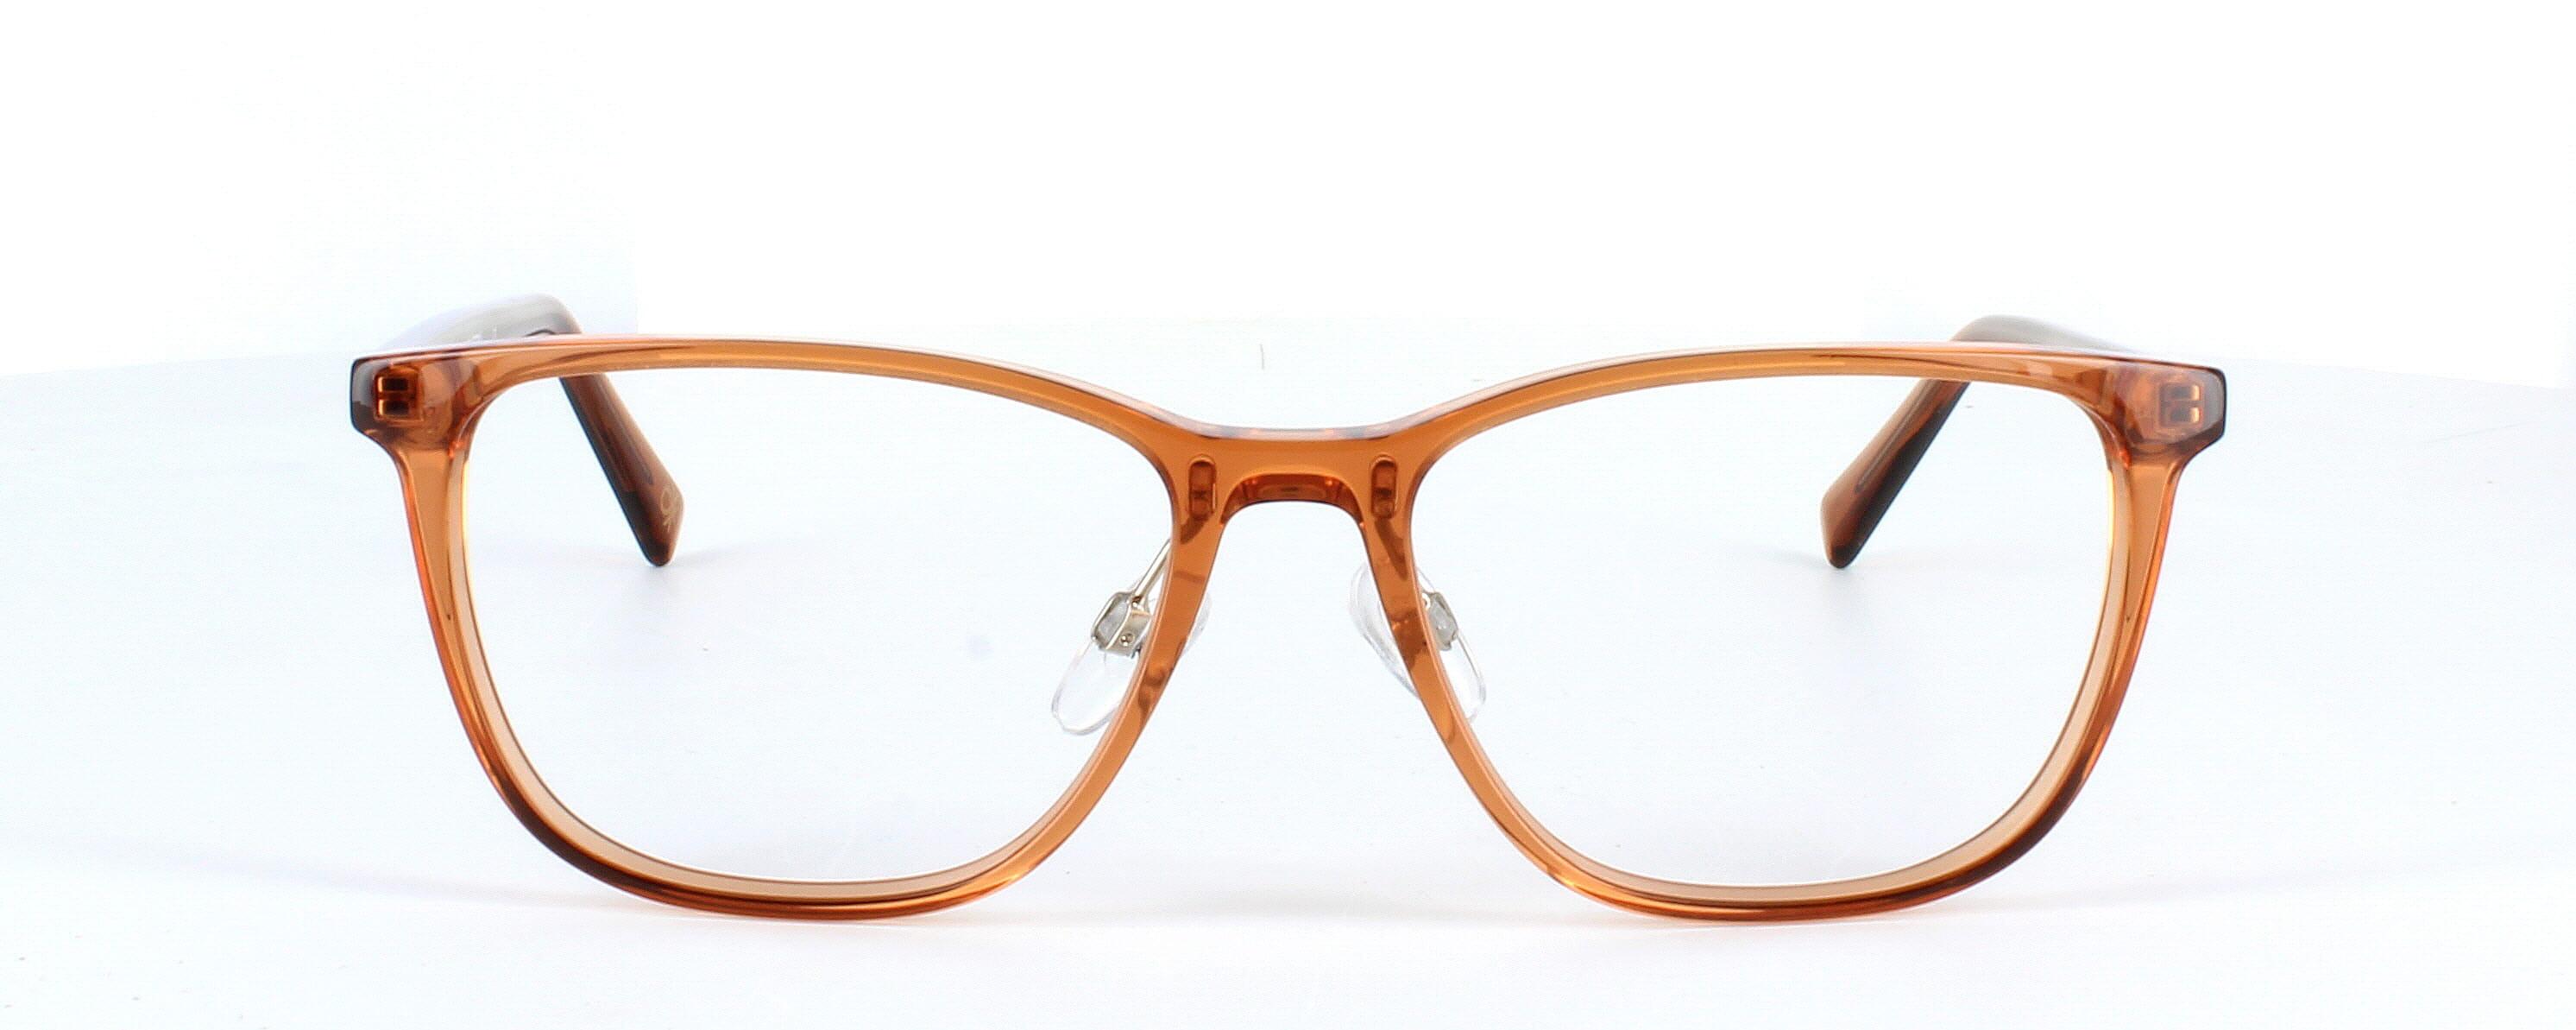 Benetton BEO1029 119 - Gent's crystal brown rectangular shaped glasses with sprung hinge temples - image view 2